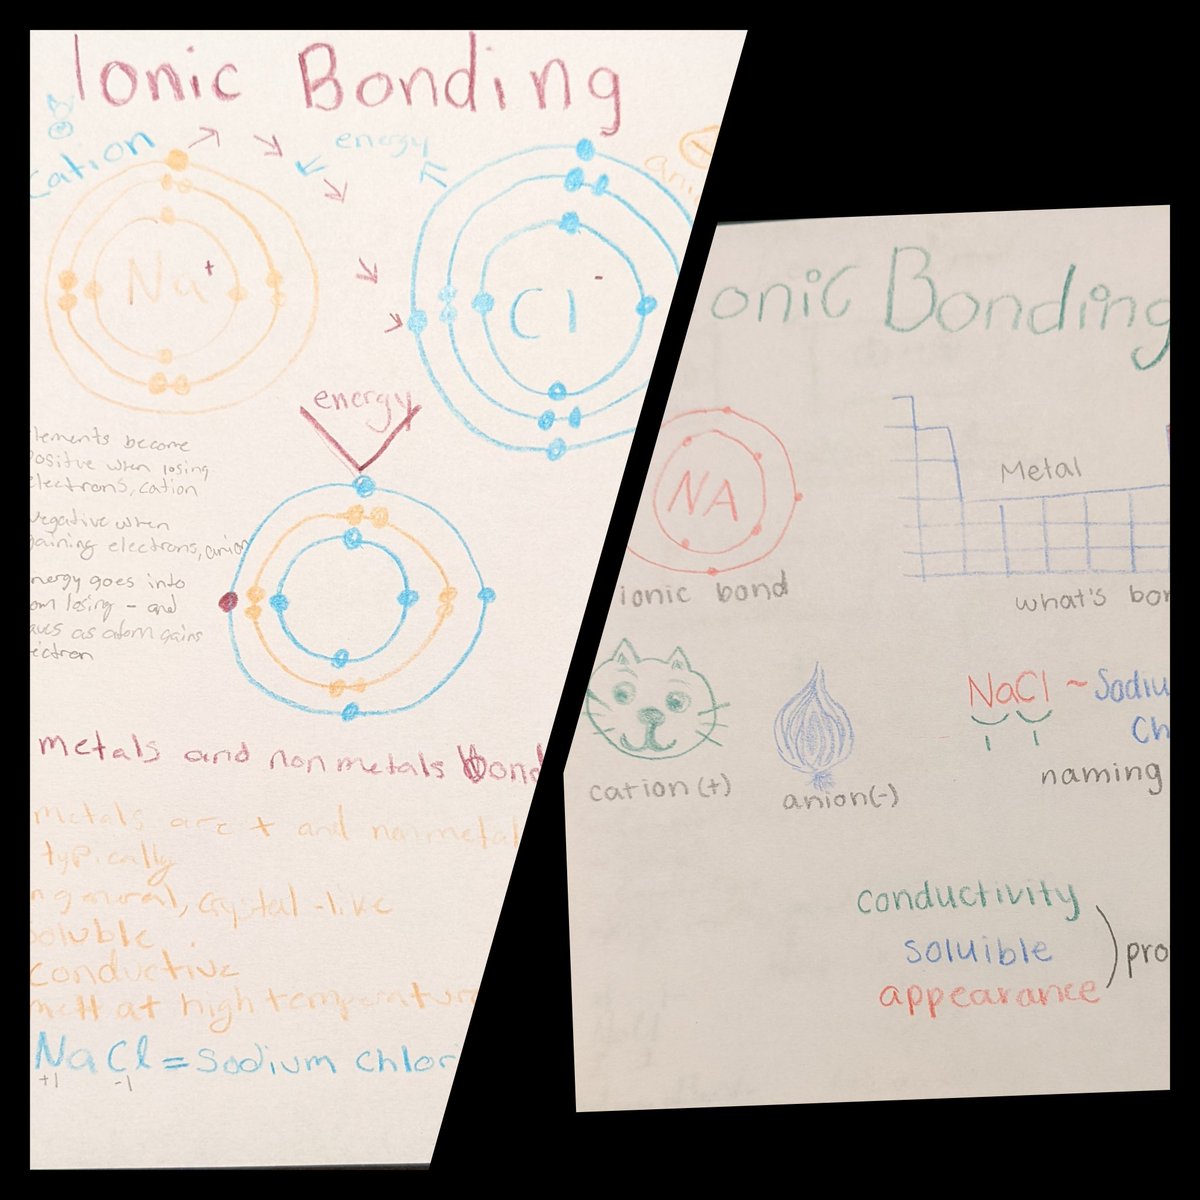 Sometimes the best #formativeassessment is to ask students to draw and write everything they know about something. It's amazing what ideas come out... And what ones don't. #chemed